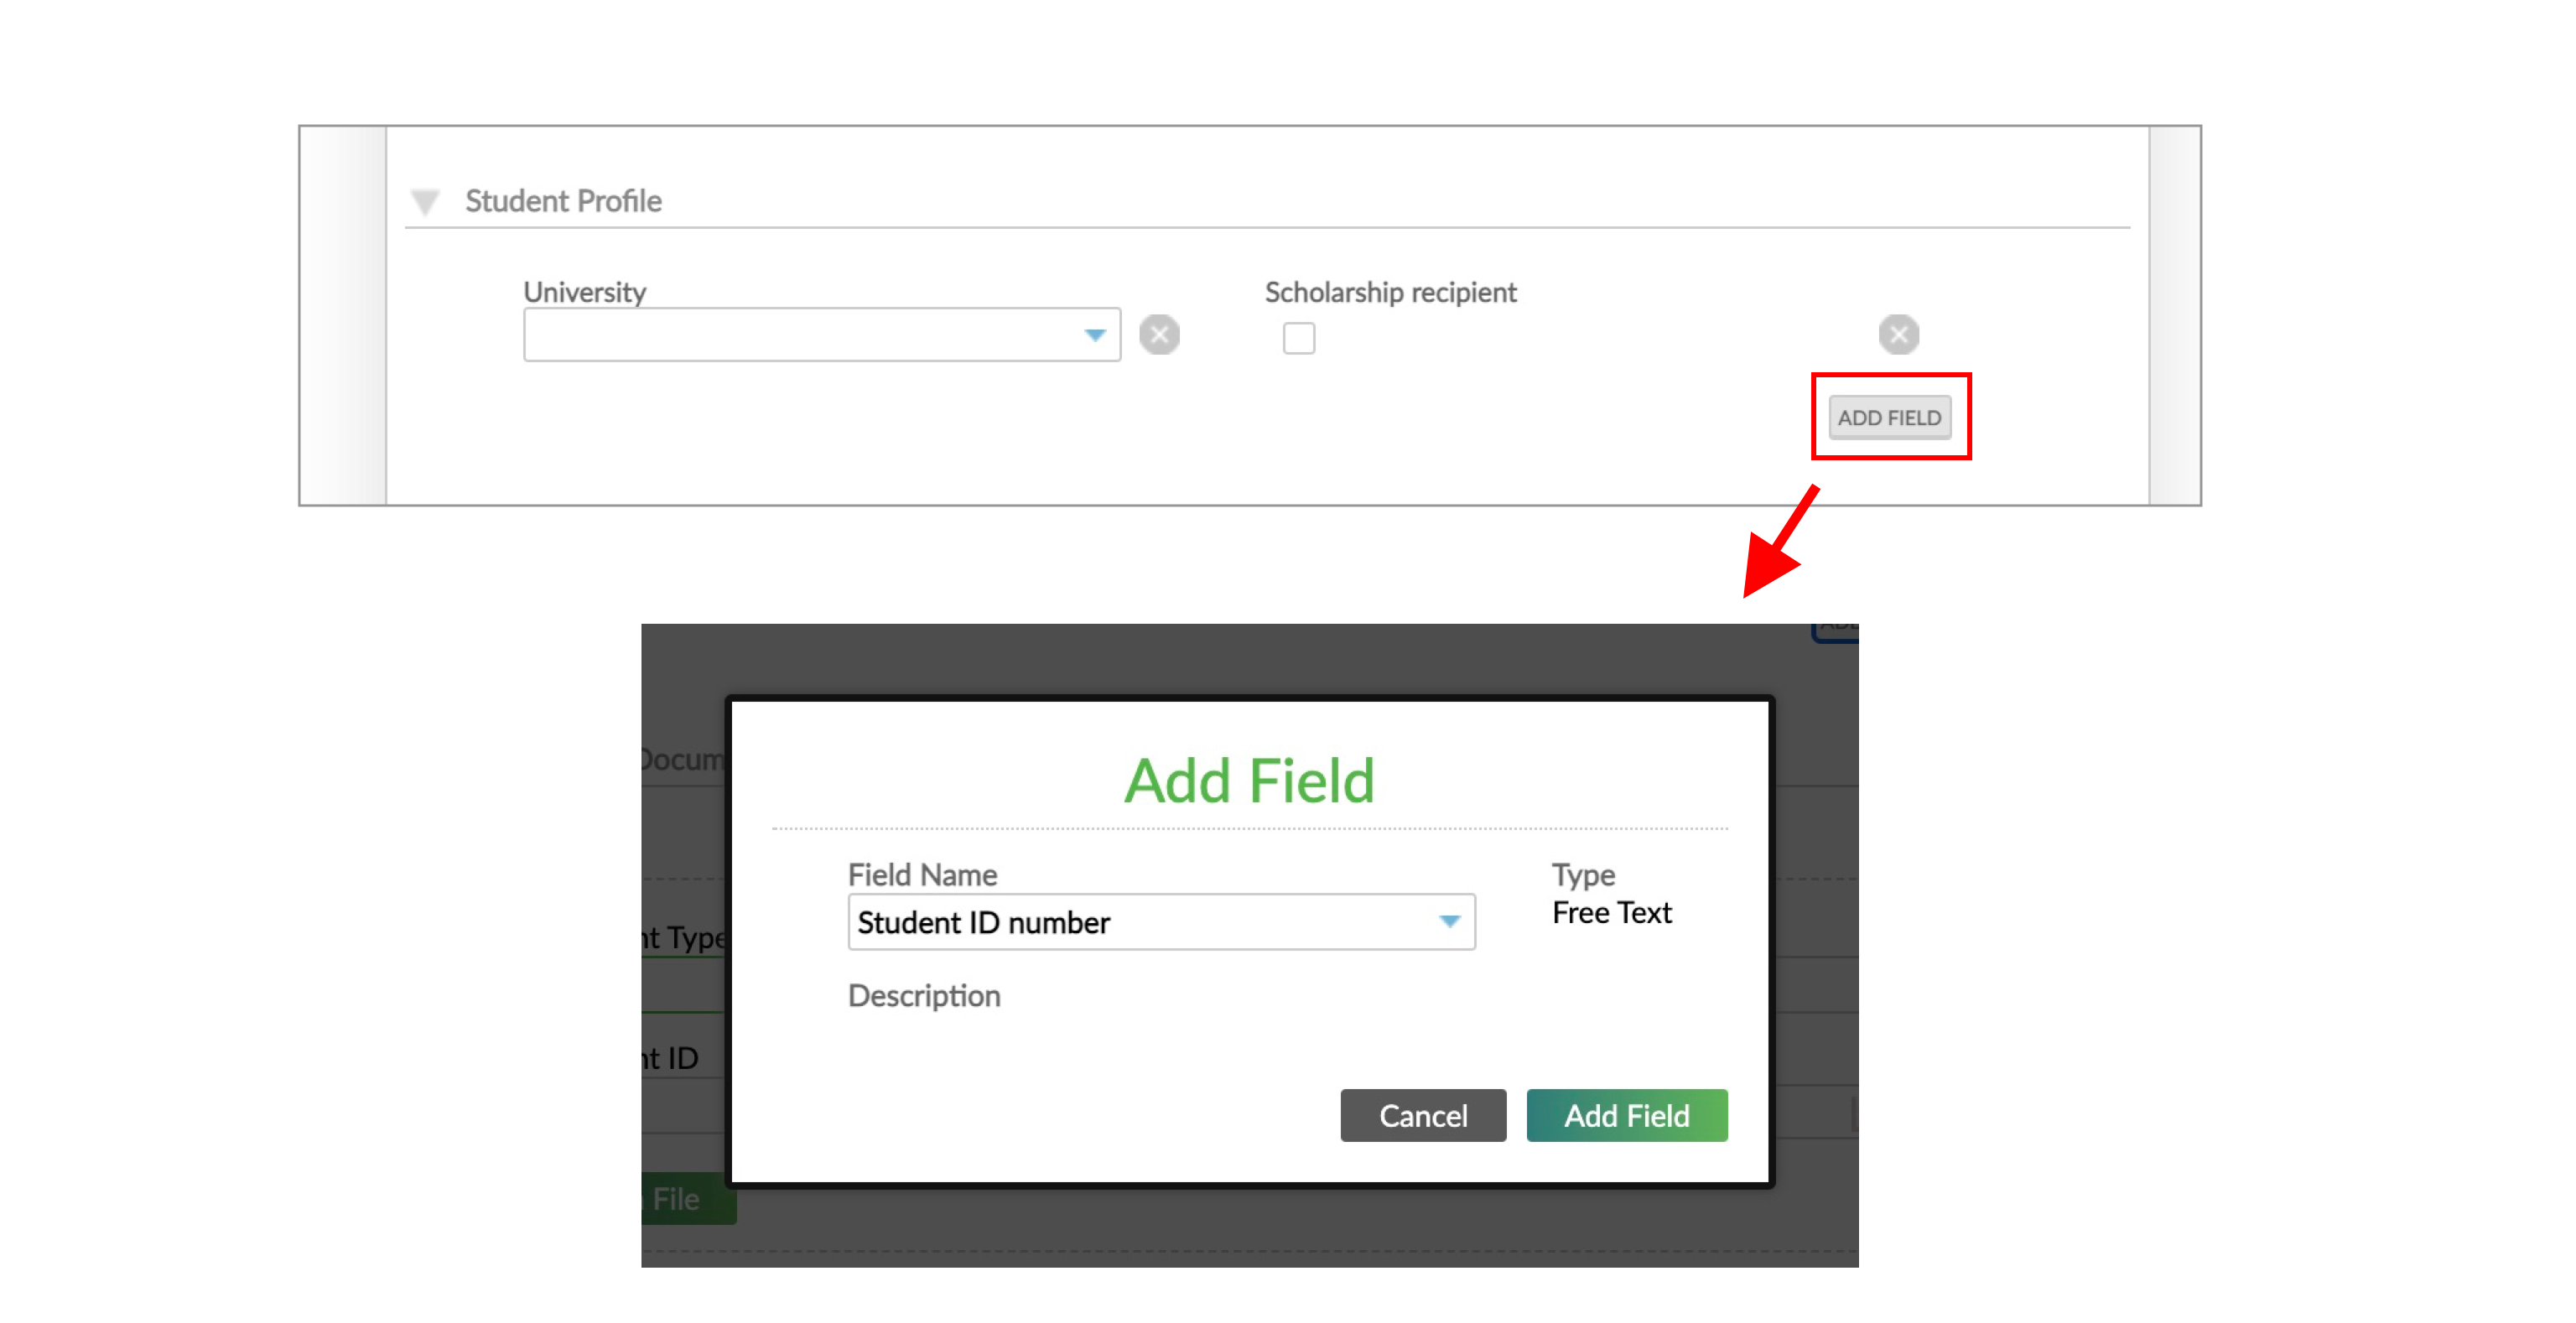 The Student ID Number custom field definition is available in the form to be added